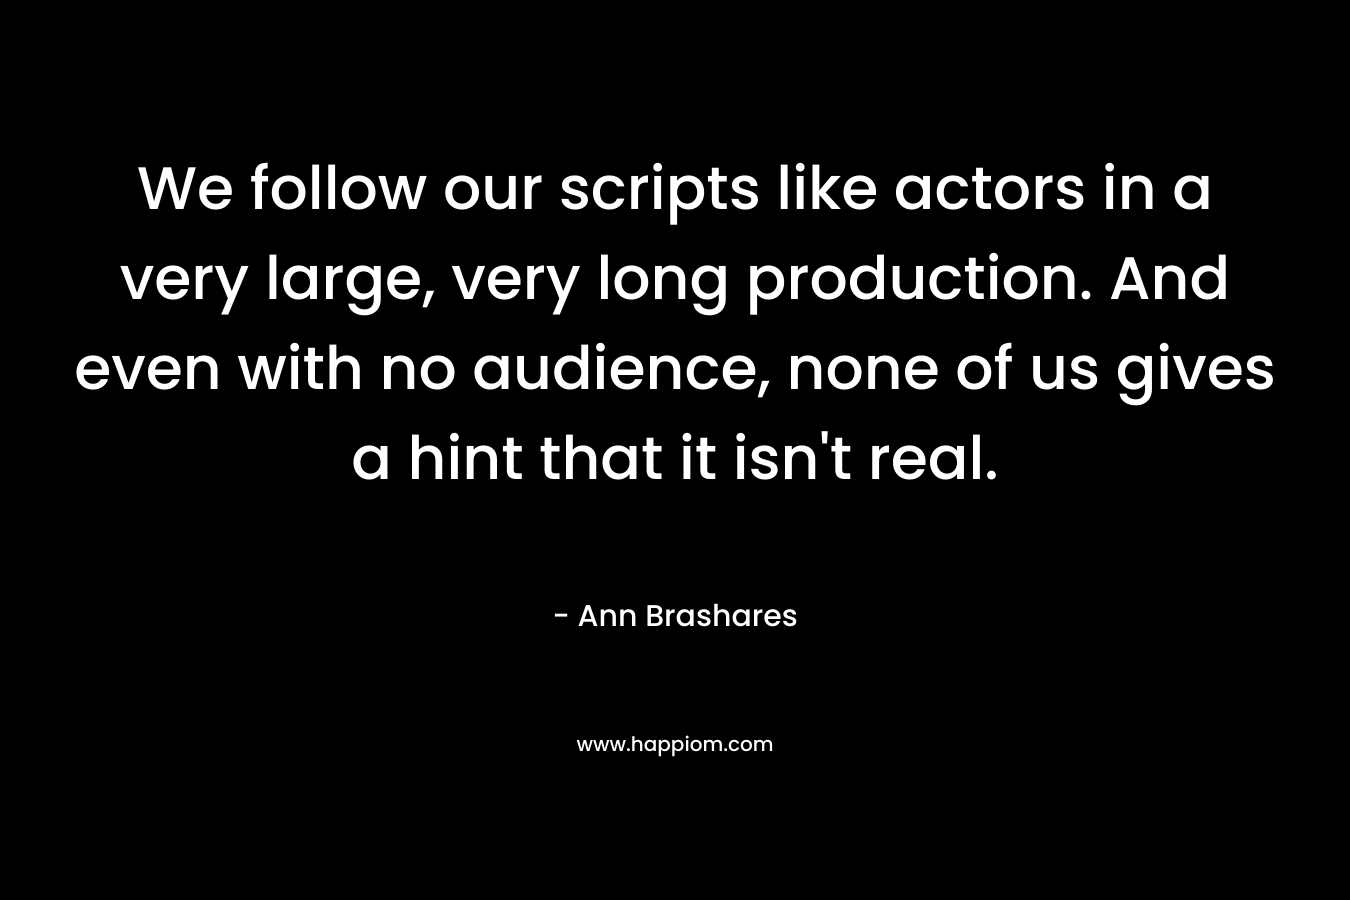 We follow our scripts like actors in a very large, very long production. And even with no audience, none of us gives a hint that it isn’t real. – Ann Brashares